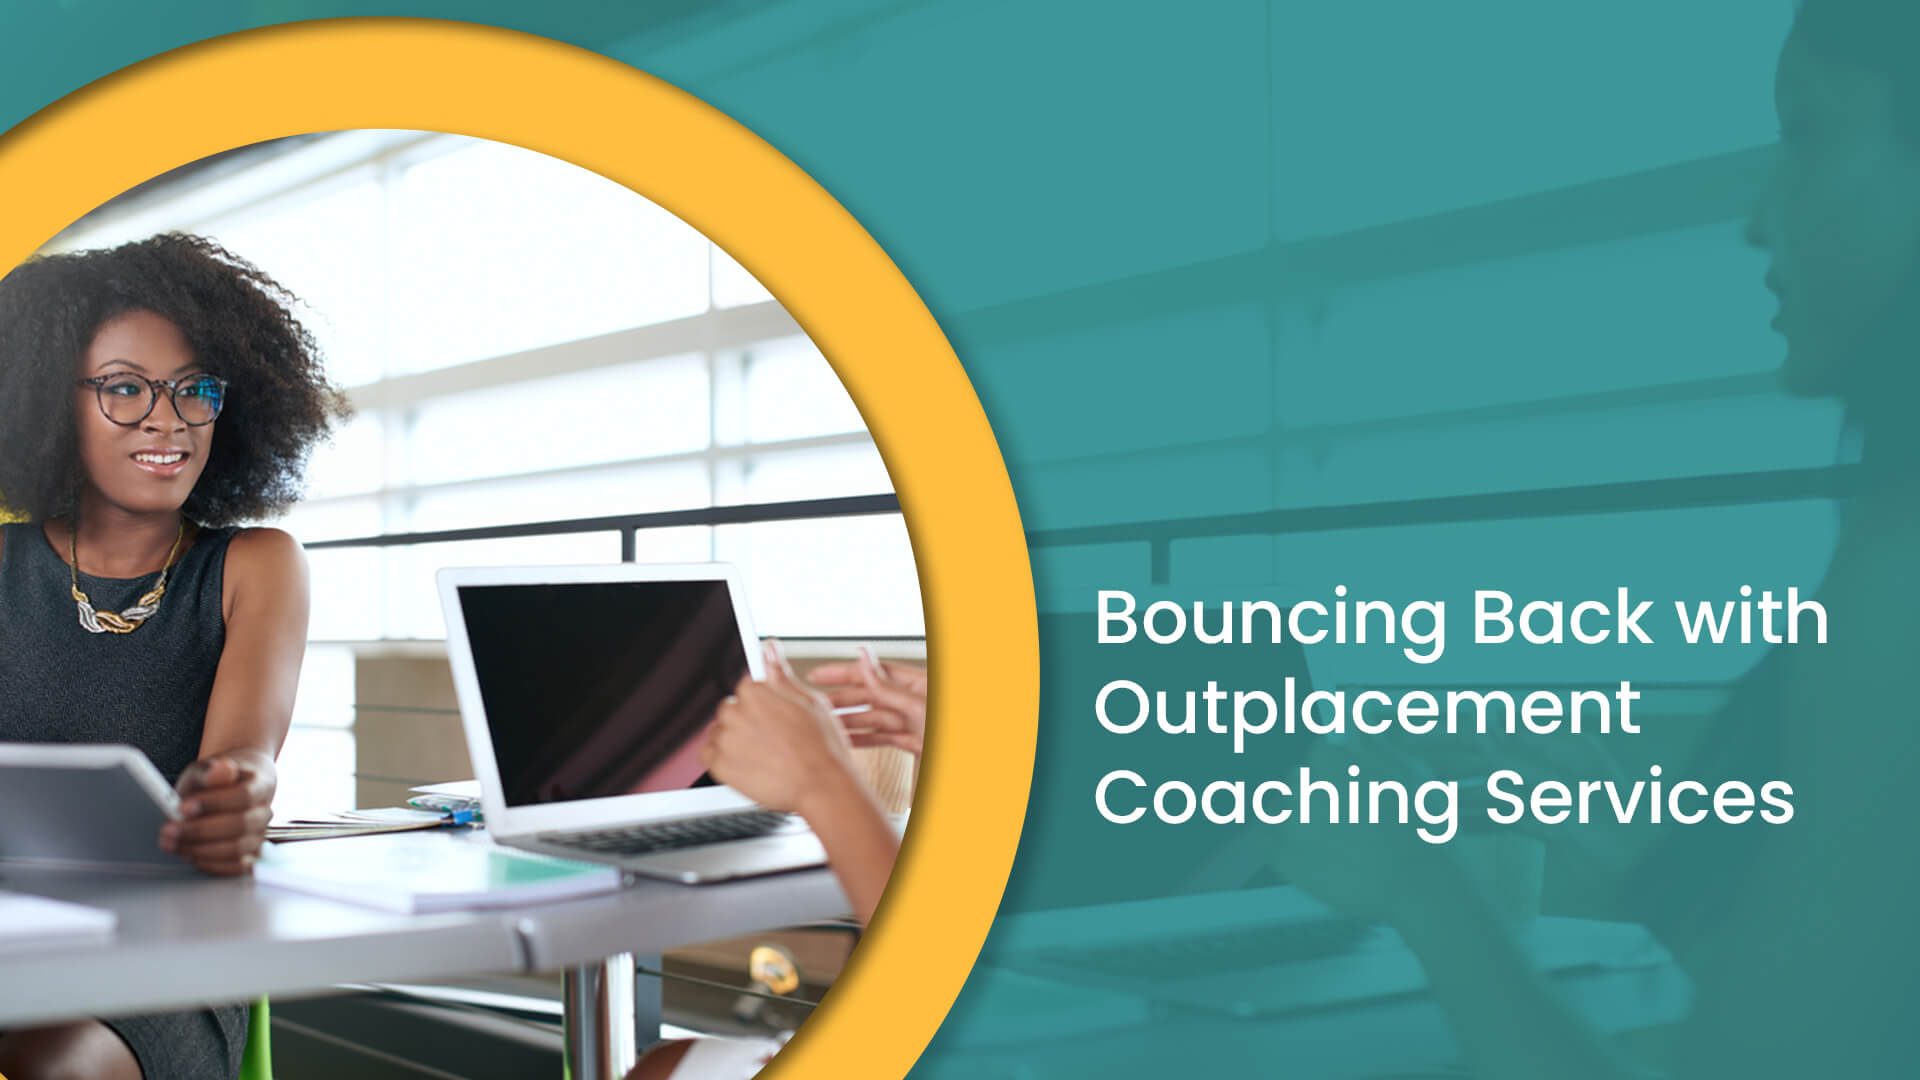 Bouncing back with outplacement coaching services